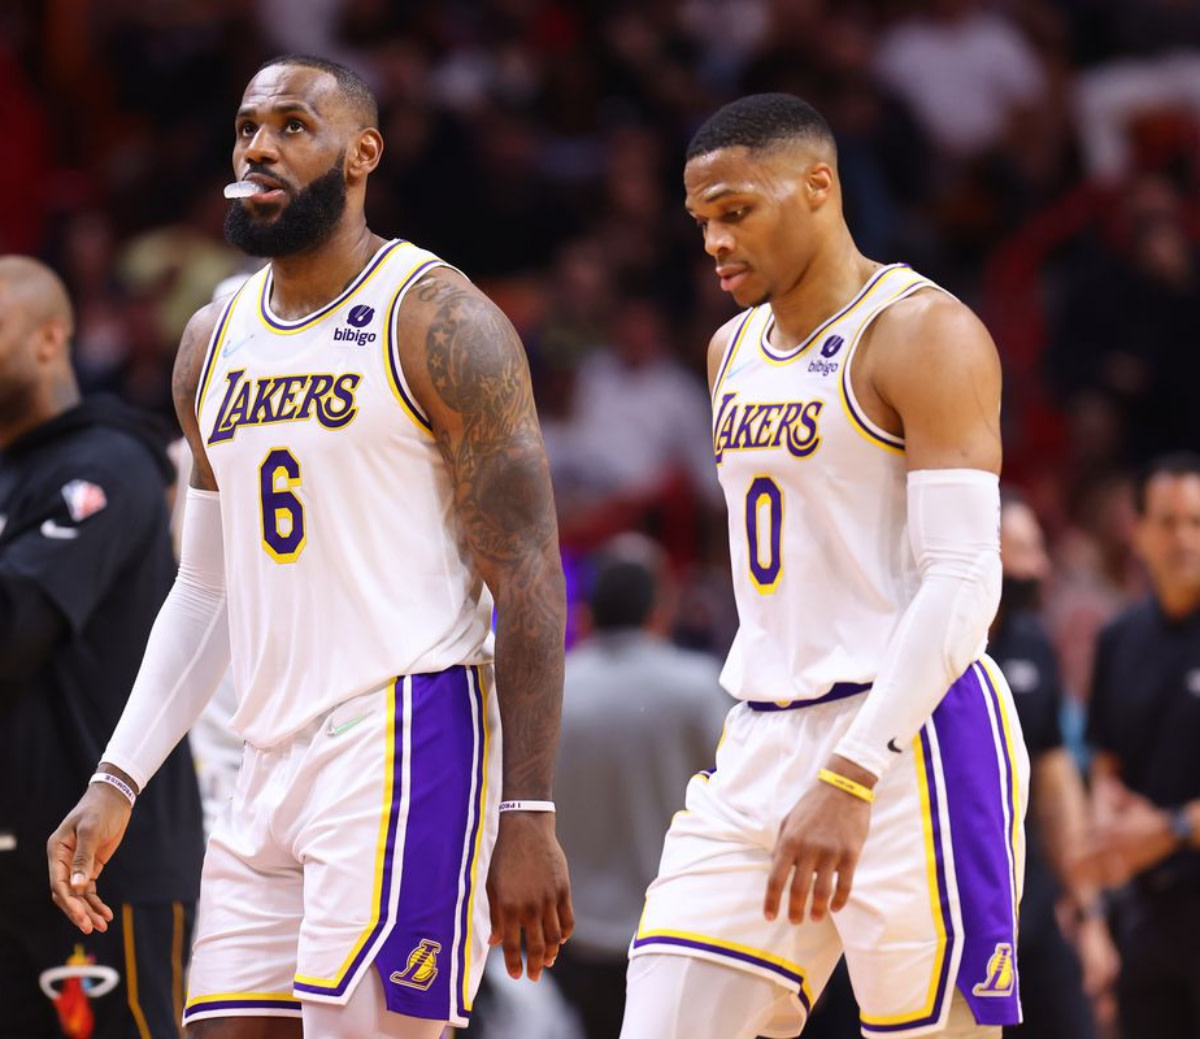 NBA Fans React To Los Angeles Lakers' Poor Opening Sequence Against The Miami Heat: "This Team Is Pure Comedy"